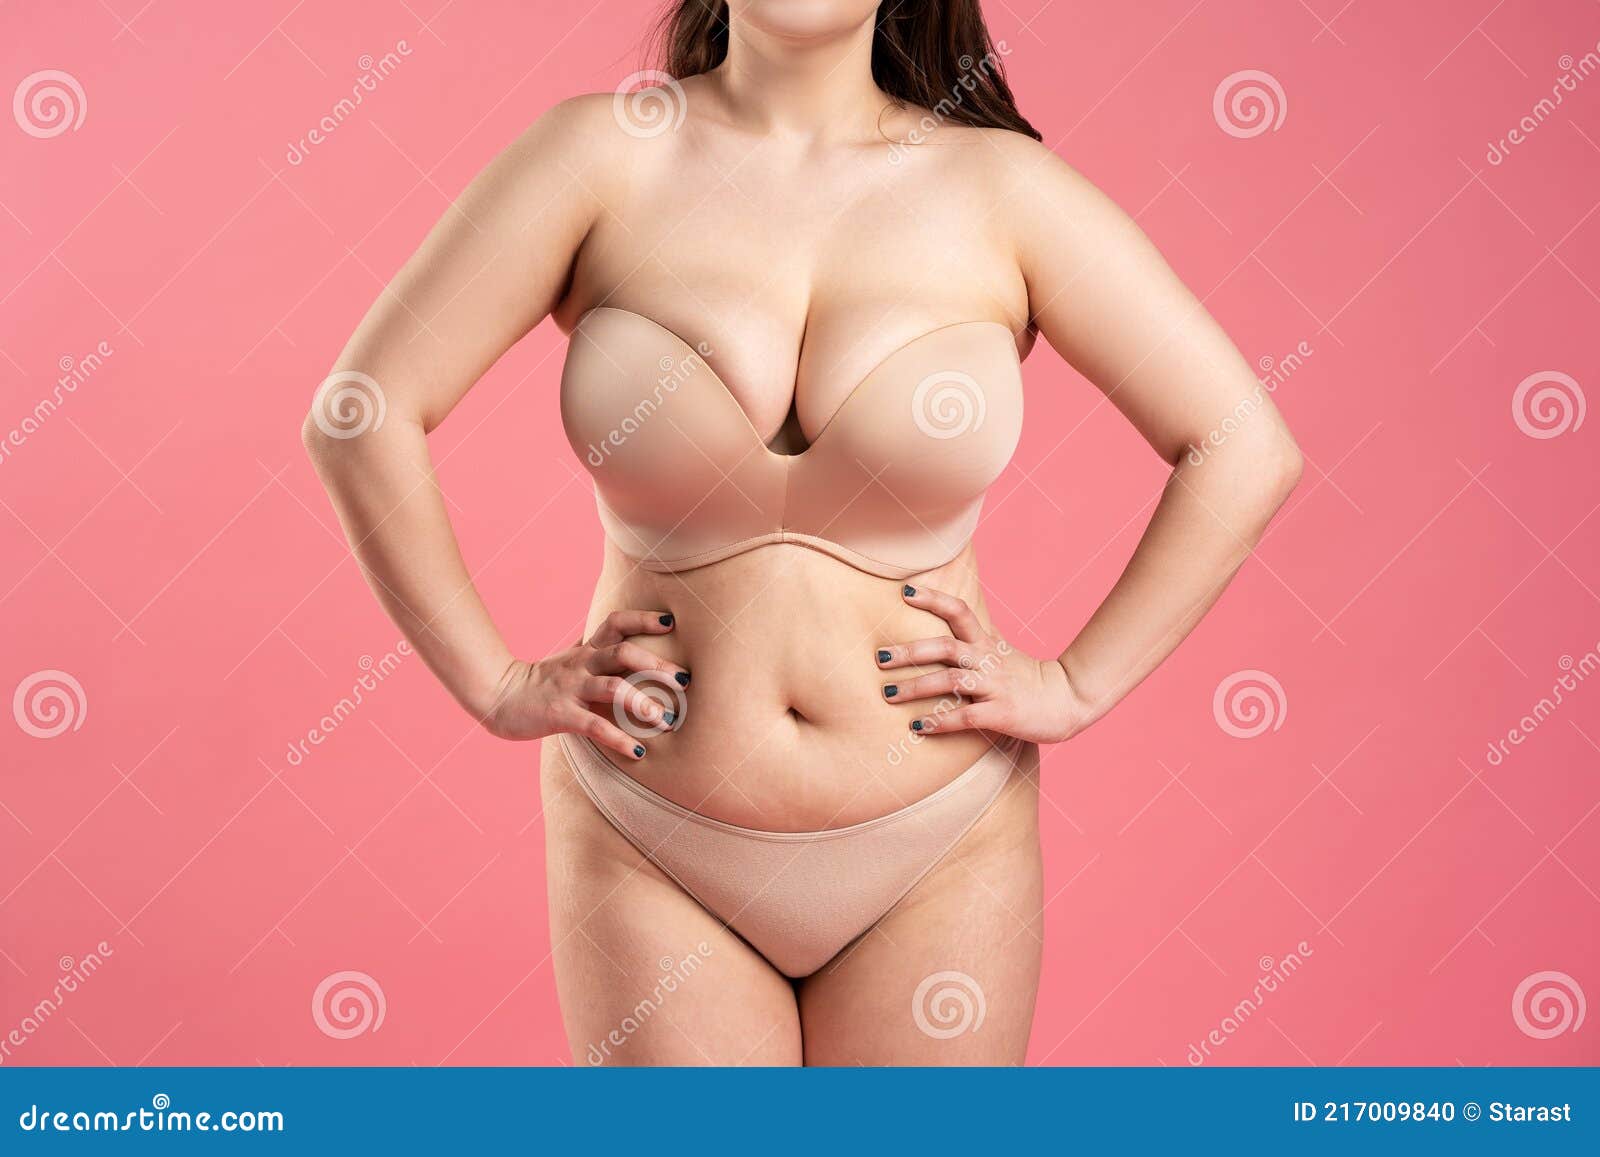 Fat Woman with Large Breasts in a Push-up Bra on Pink Background,  Overweight Female Body Stock Photo - Image of model, plastic: 217009840